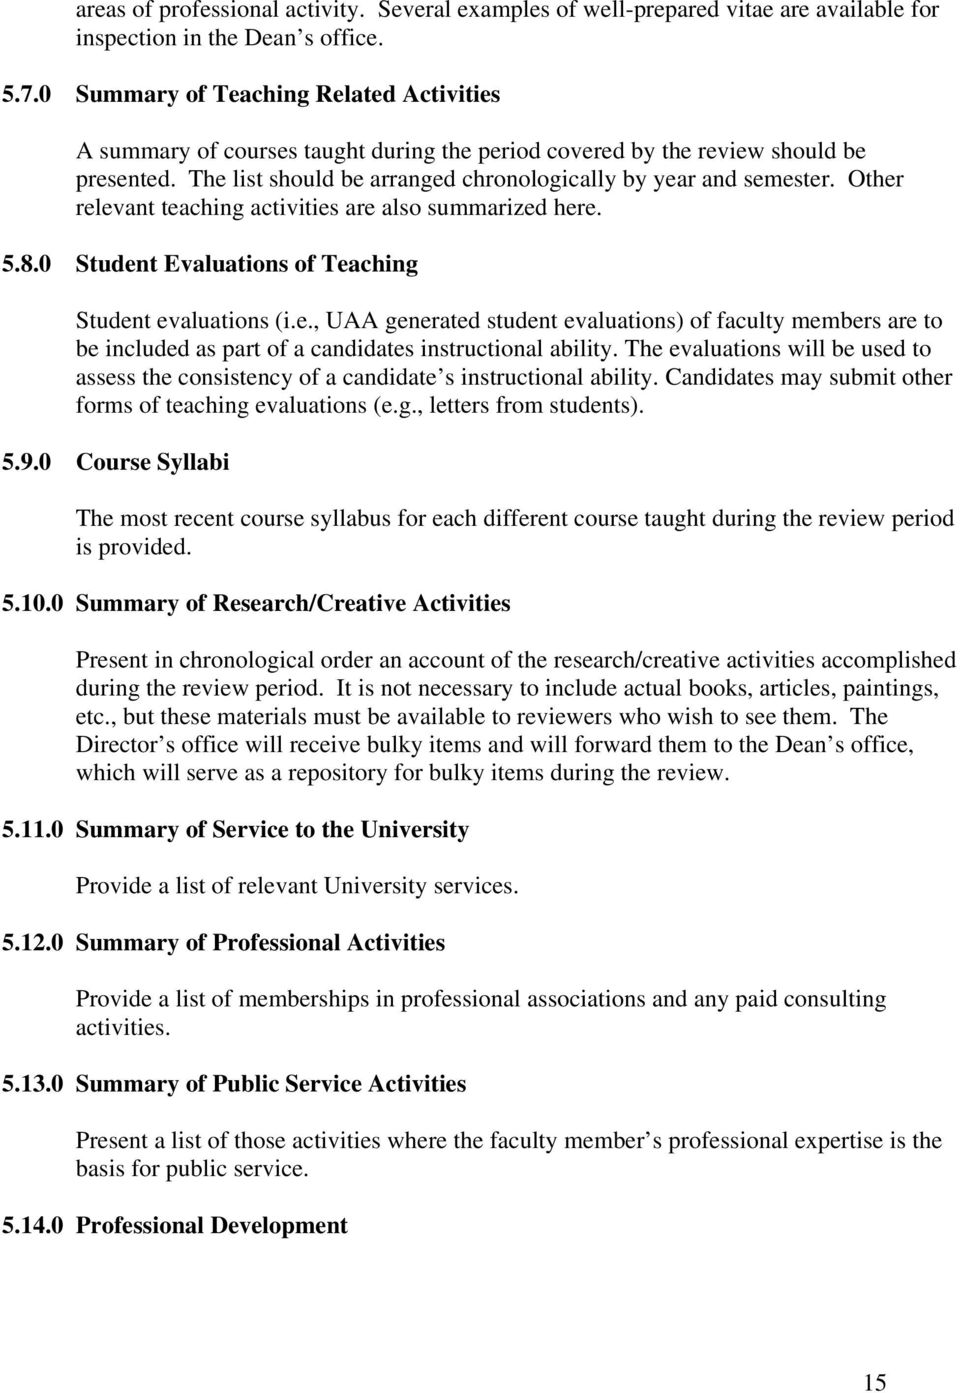 Other relevant teaching activities are also summarized here. 5.8.0 Student Evaluations of Teaching Student evaluations (i.e., UAA generated student evaluations) of faculty members are to be included as part of a candidates instructional ability.